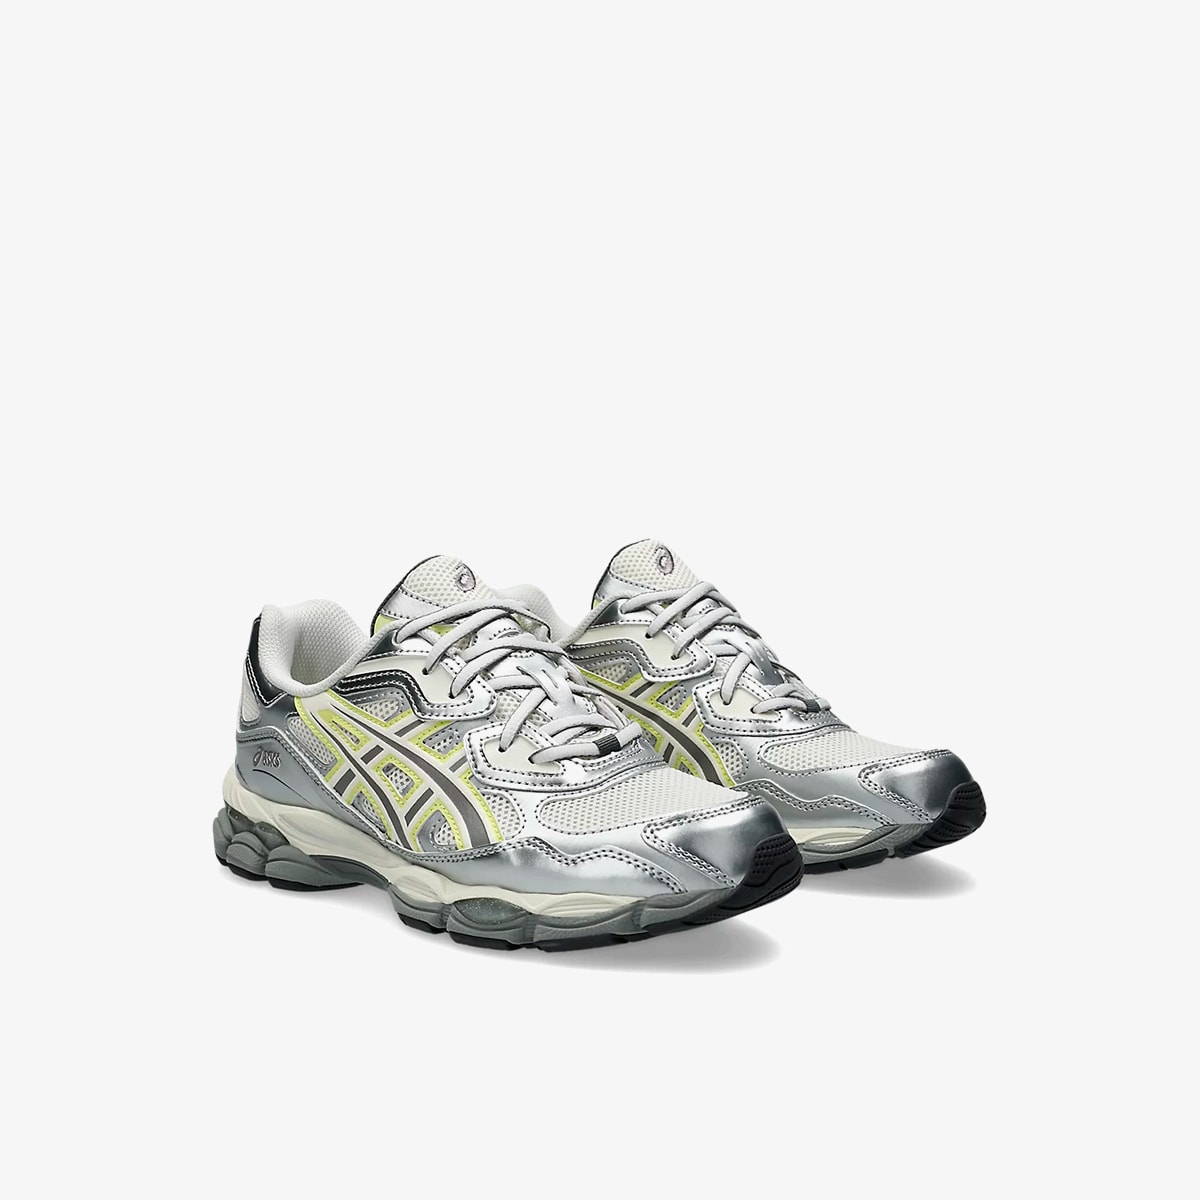 Asics X Emmi Gel-Nyc Sneakers (White) | END. Launches